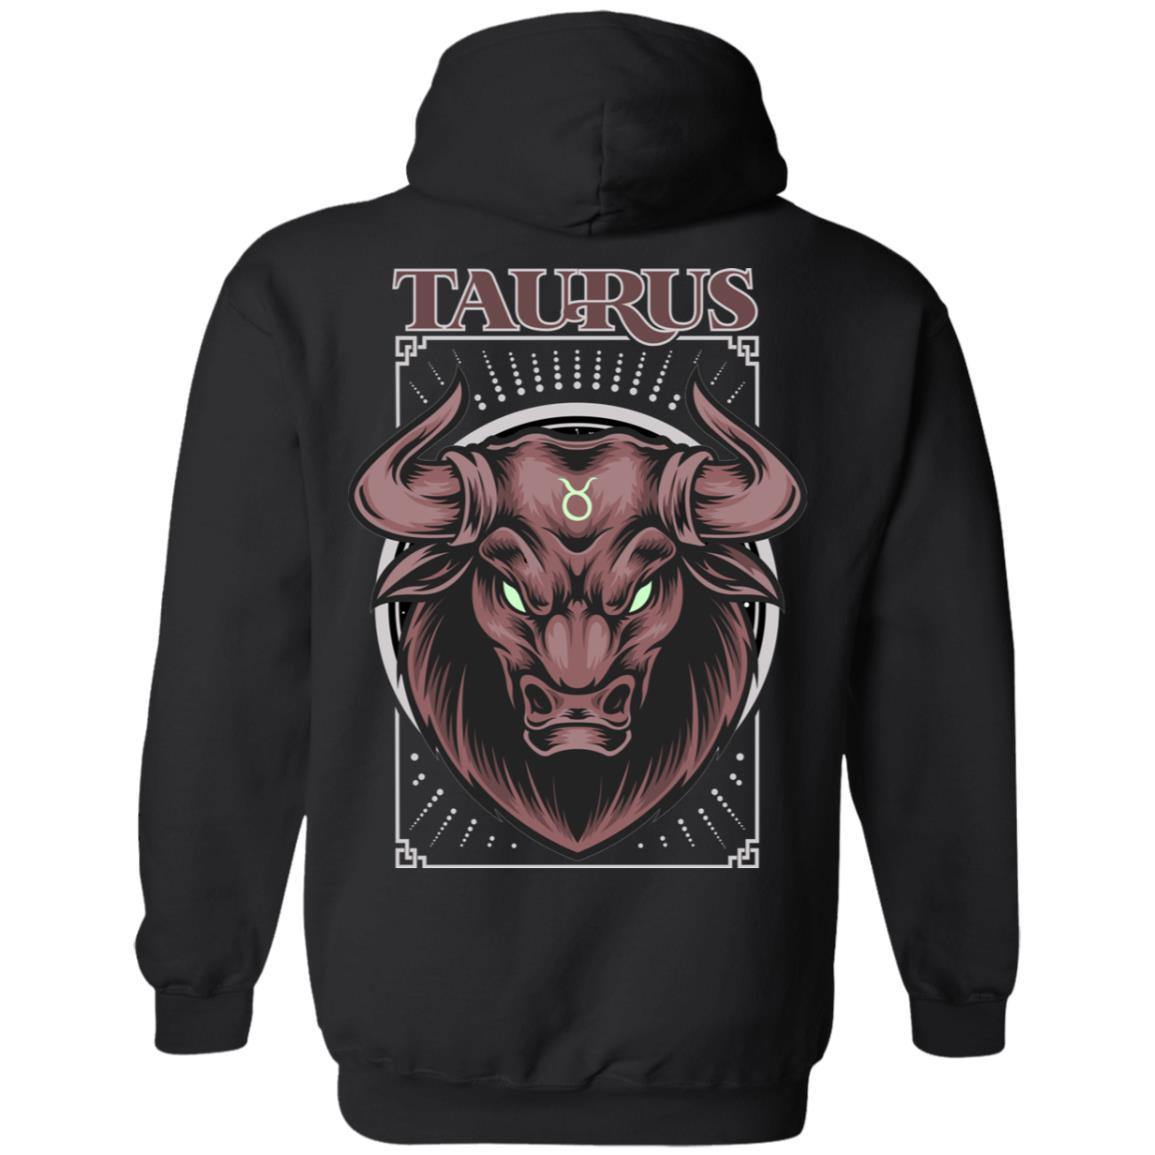 TAURUS DESIGN ON BACK AND SMALL SCORP ZONE LOGO ON FRONT - Z66 Pullover Hoodie - ScorpZone